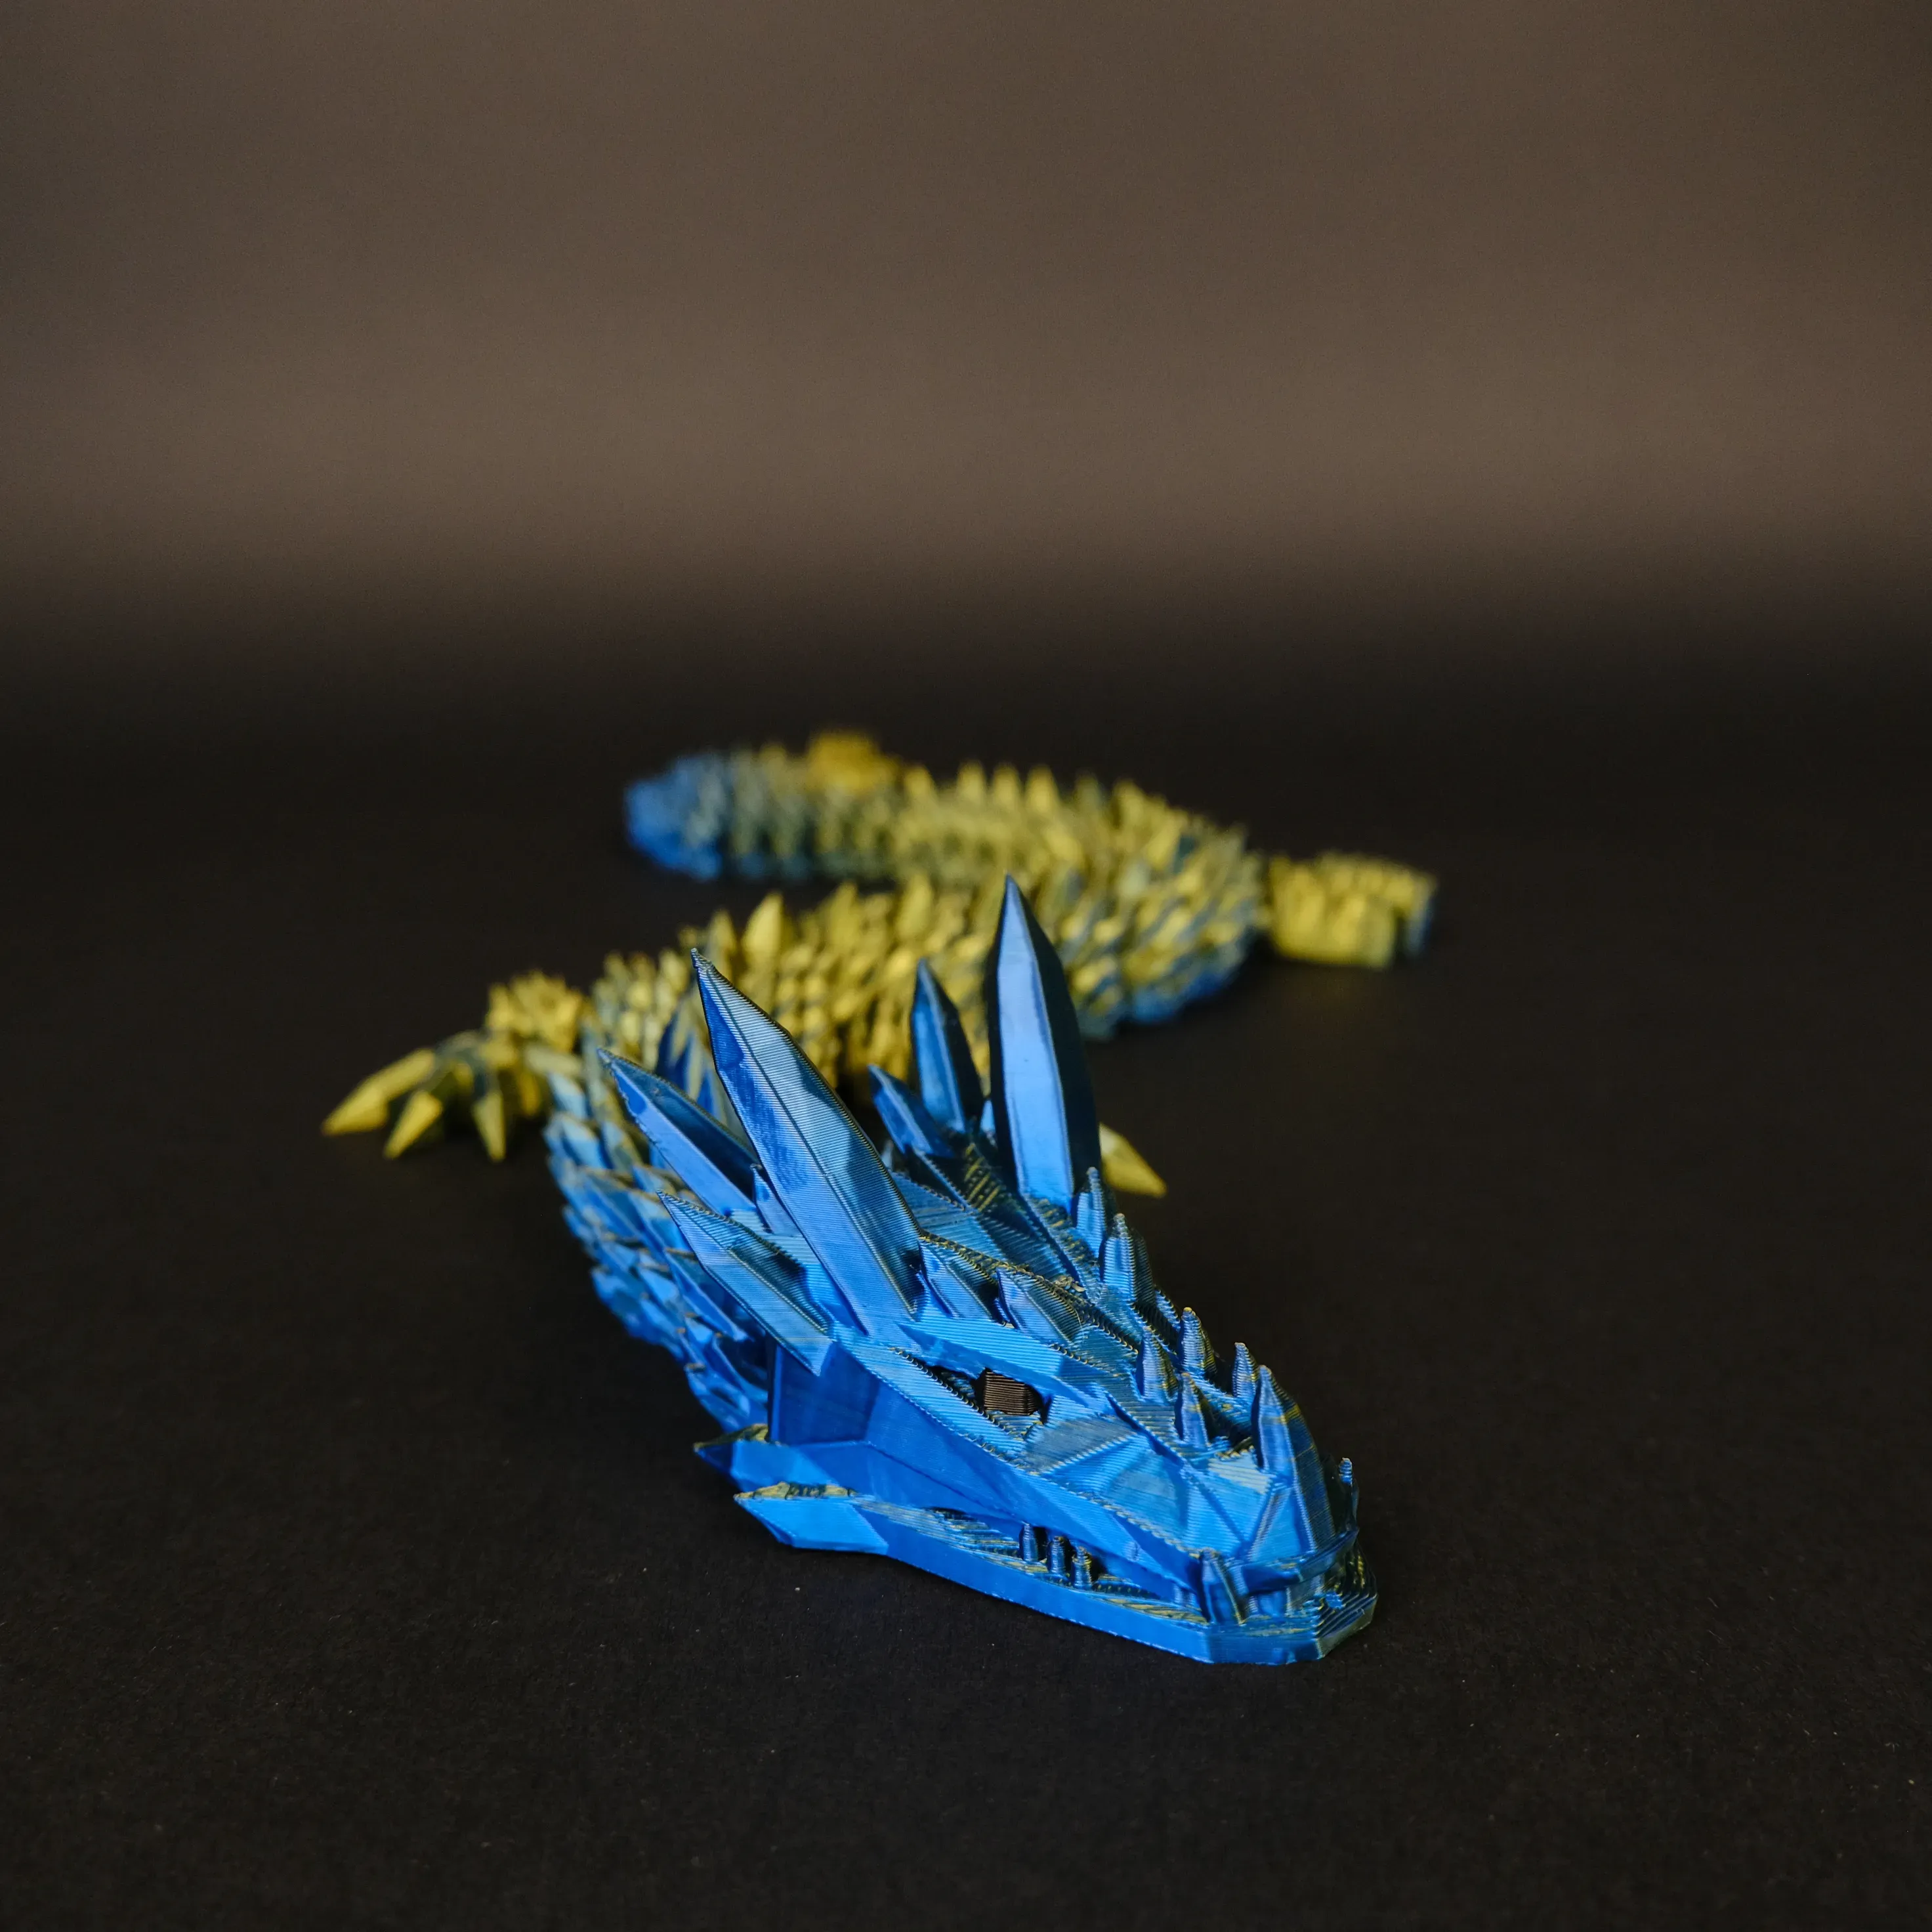 Ice Dragon - Print-in-Place